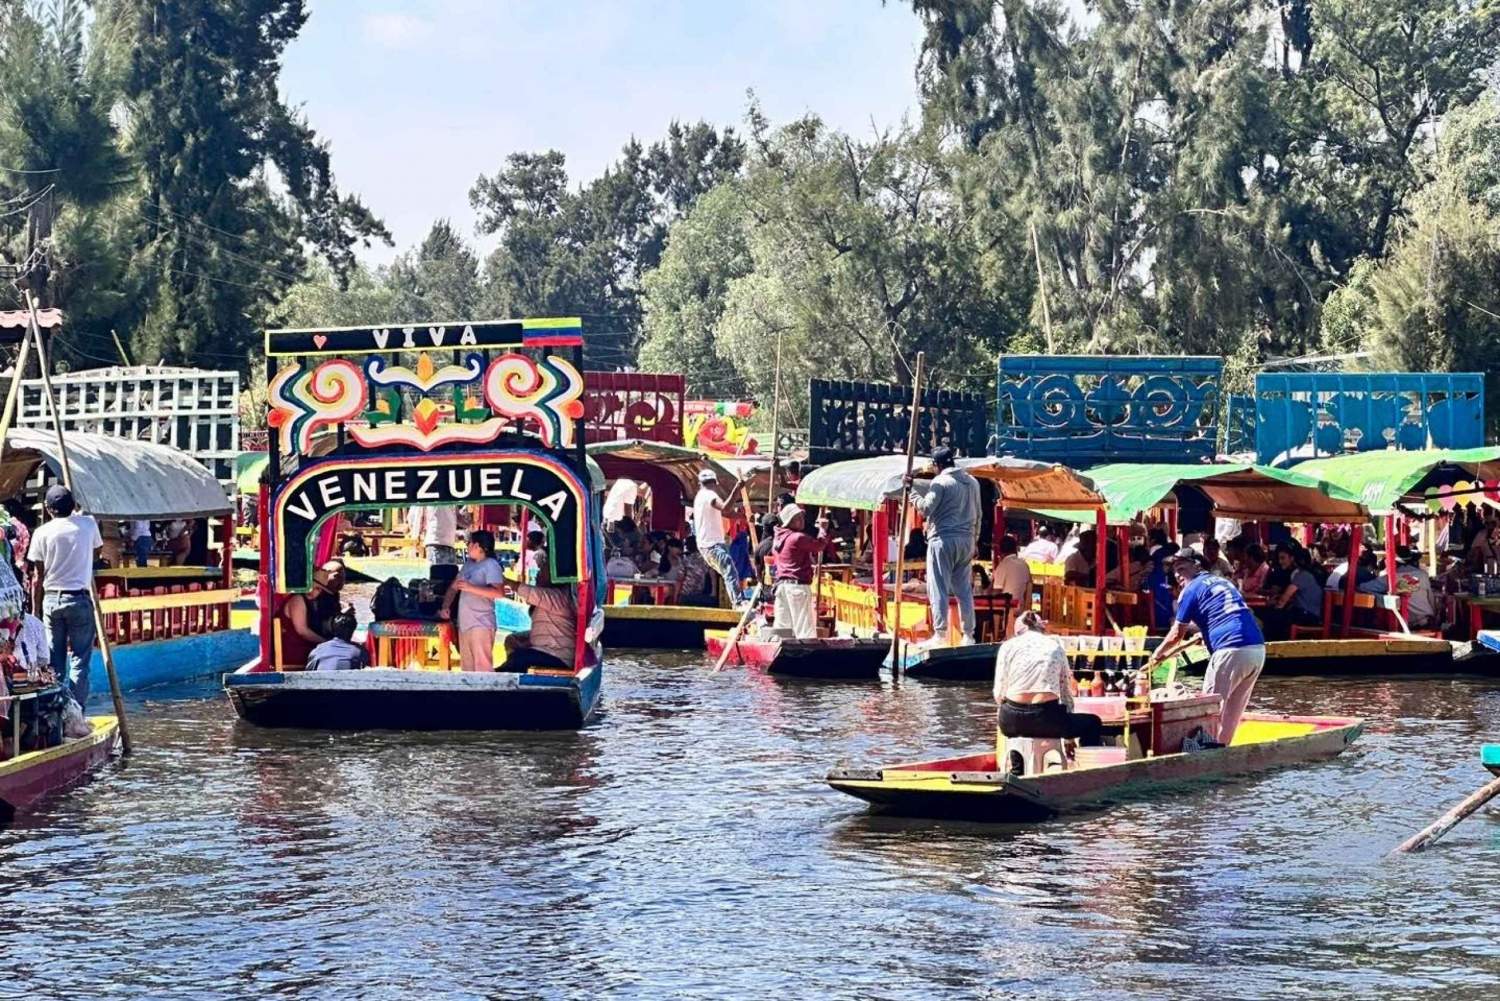 Mexico: Tour to Xochimilco and Coyoacan from CDMX